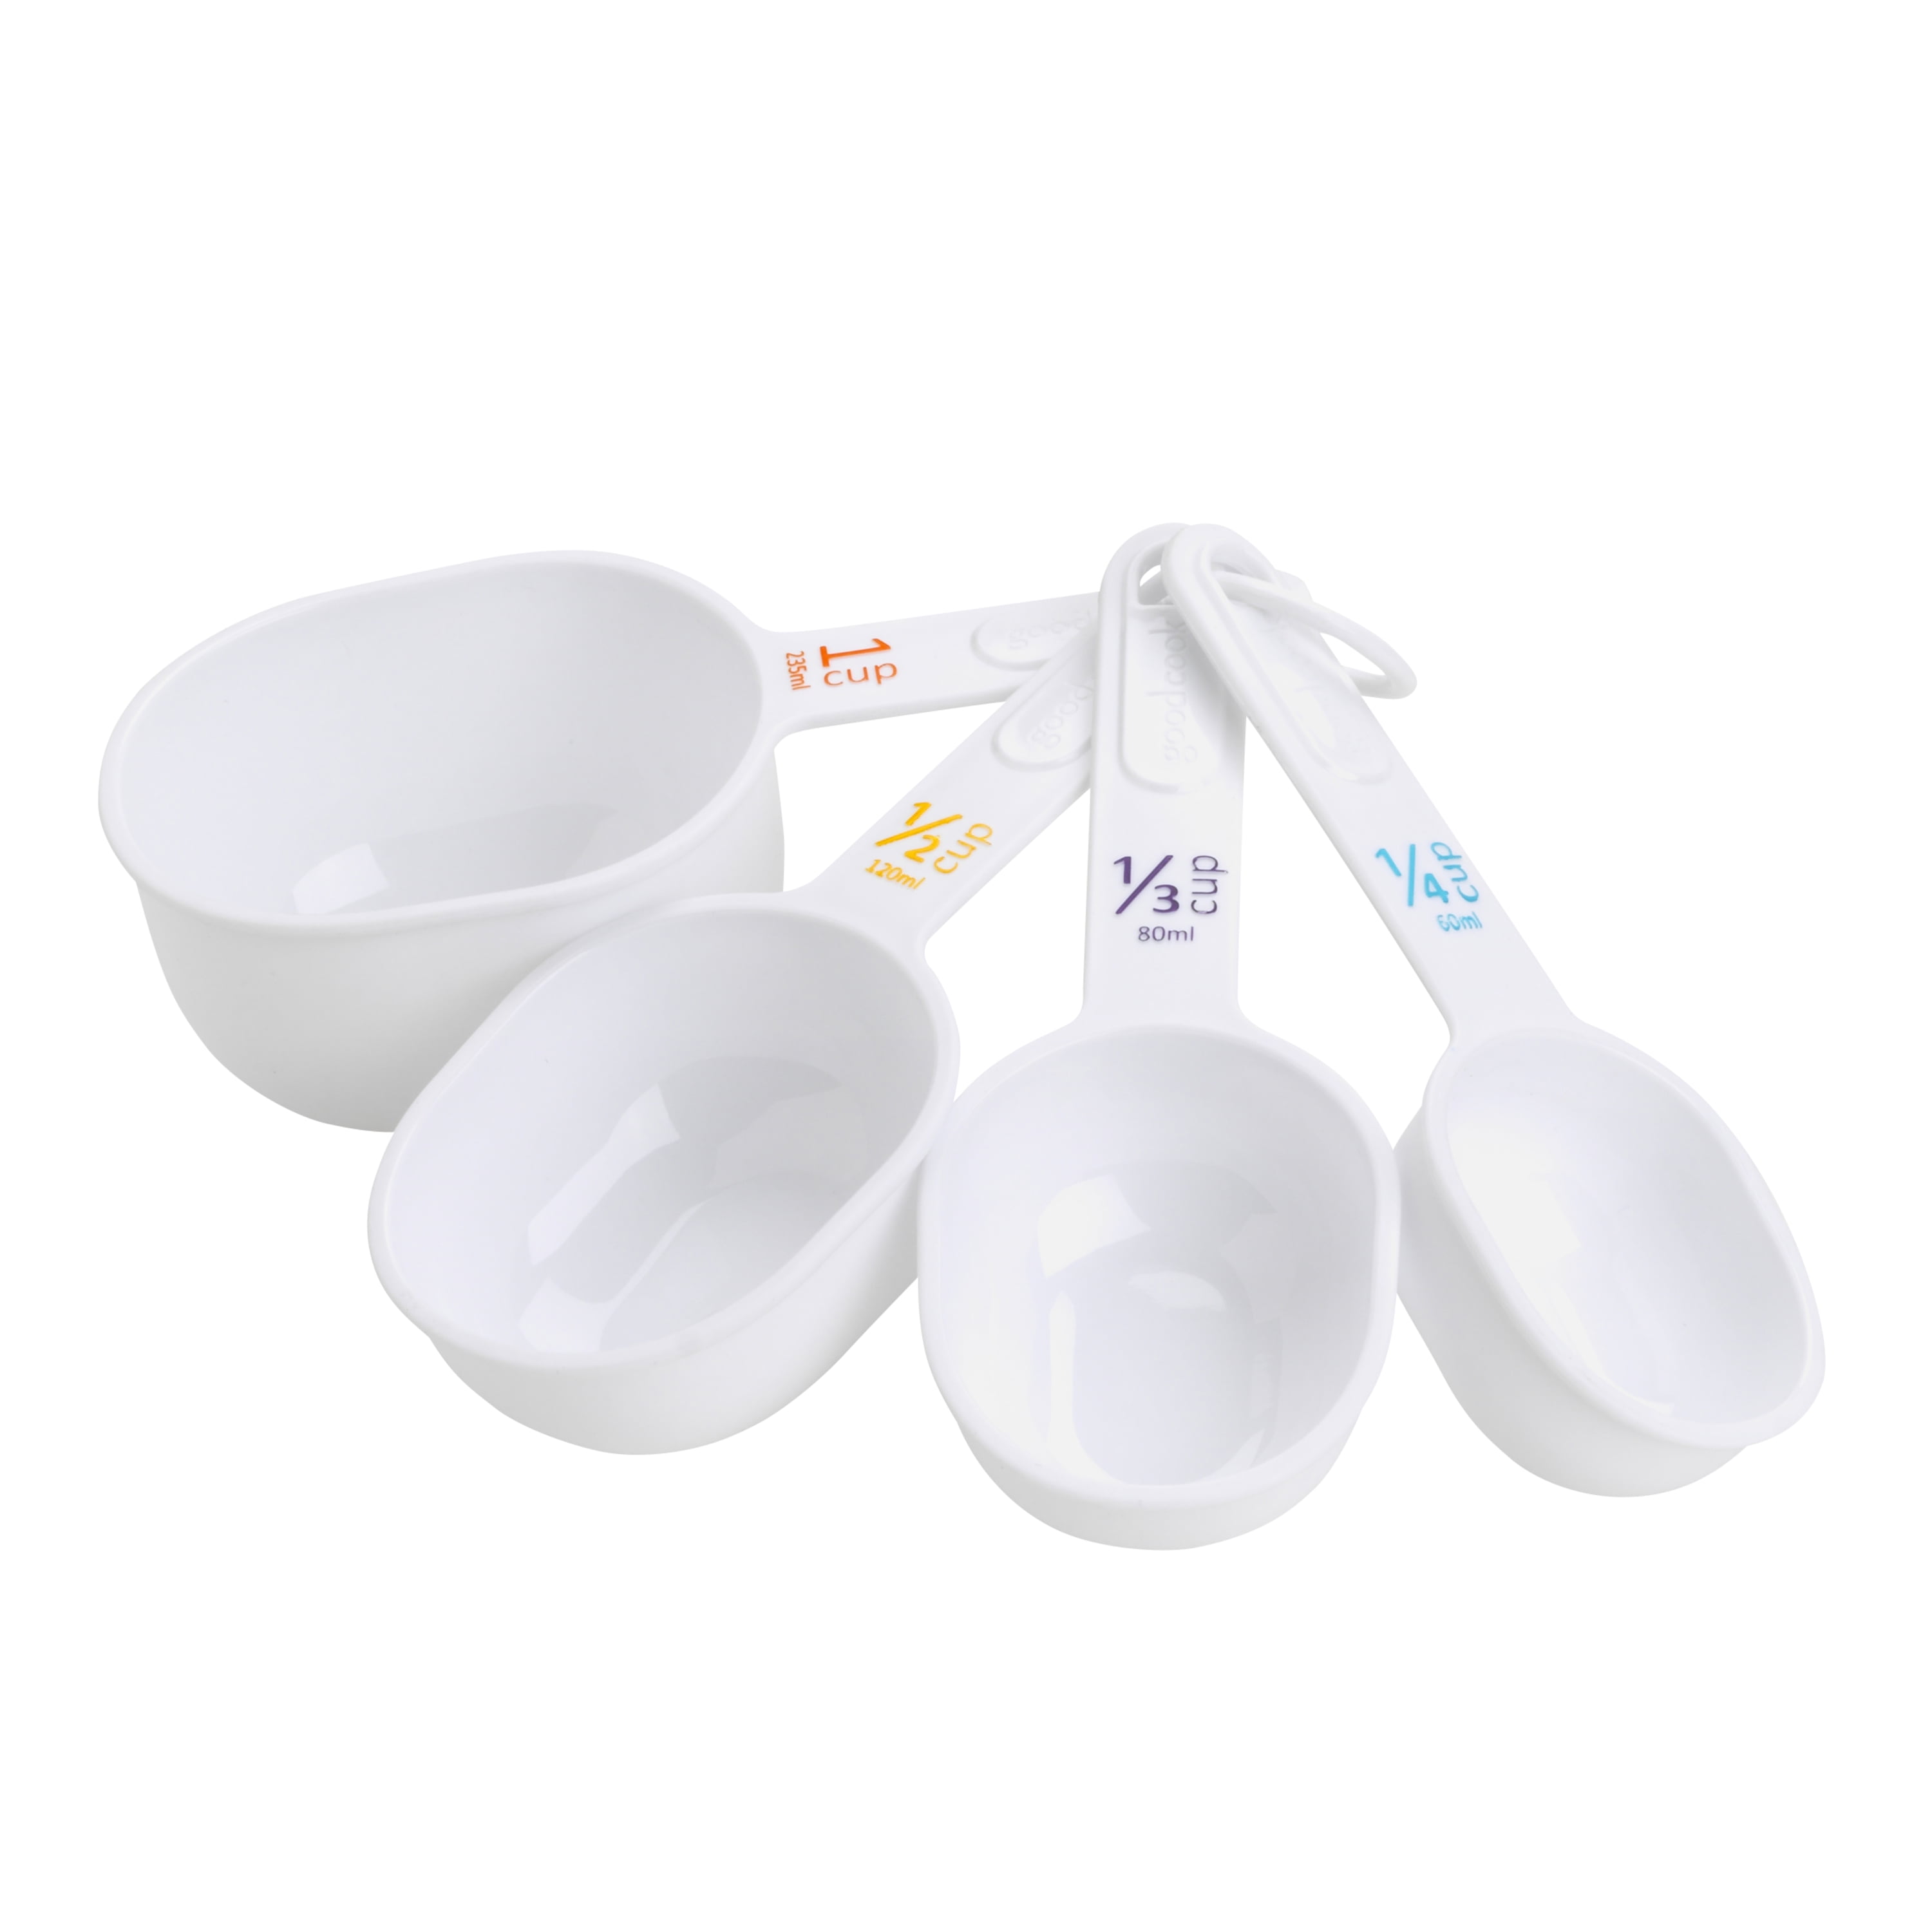 Good Cook Measuring Cup, 1 Cup